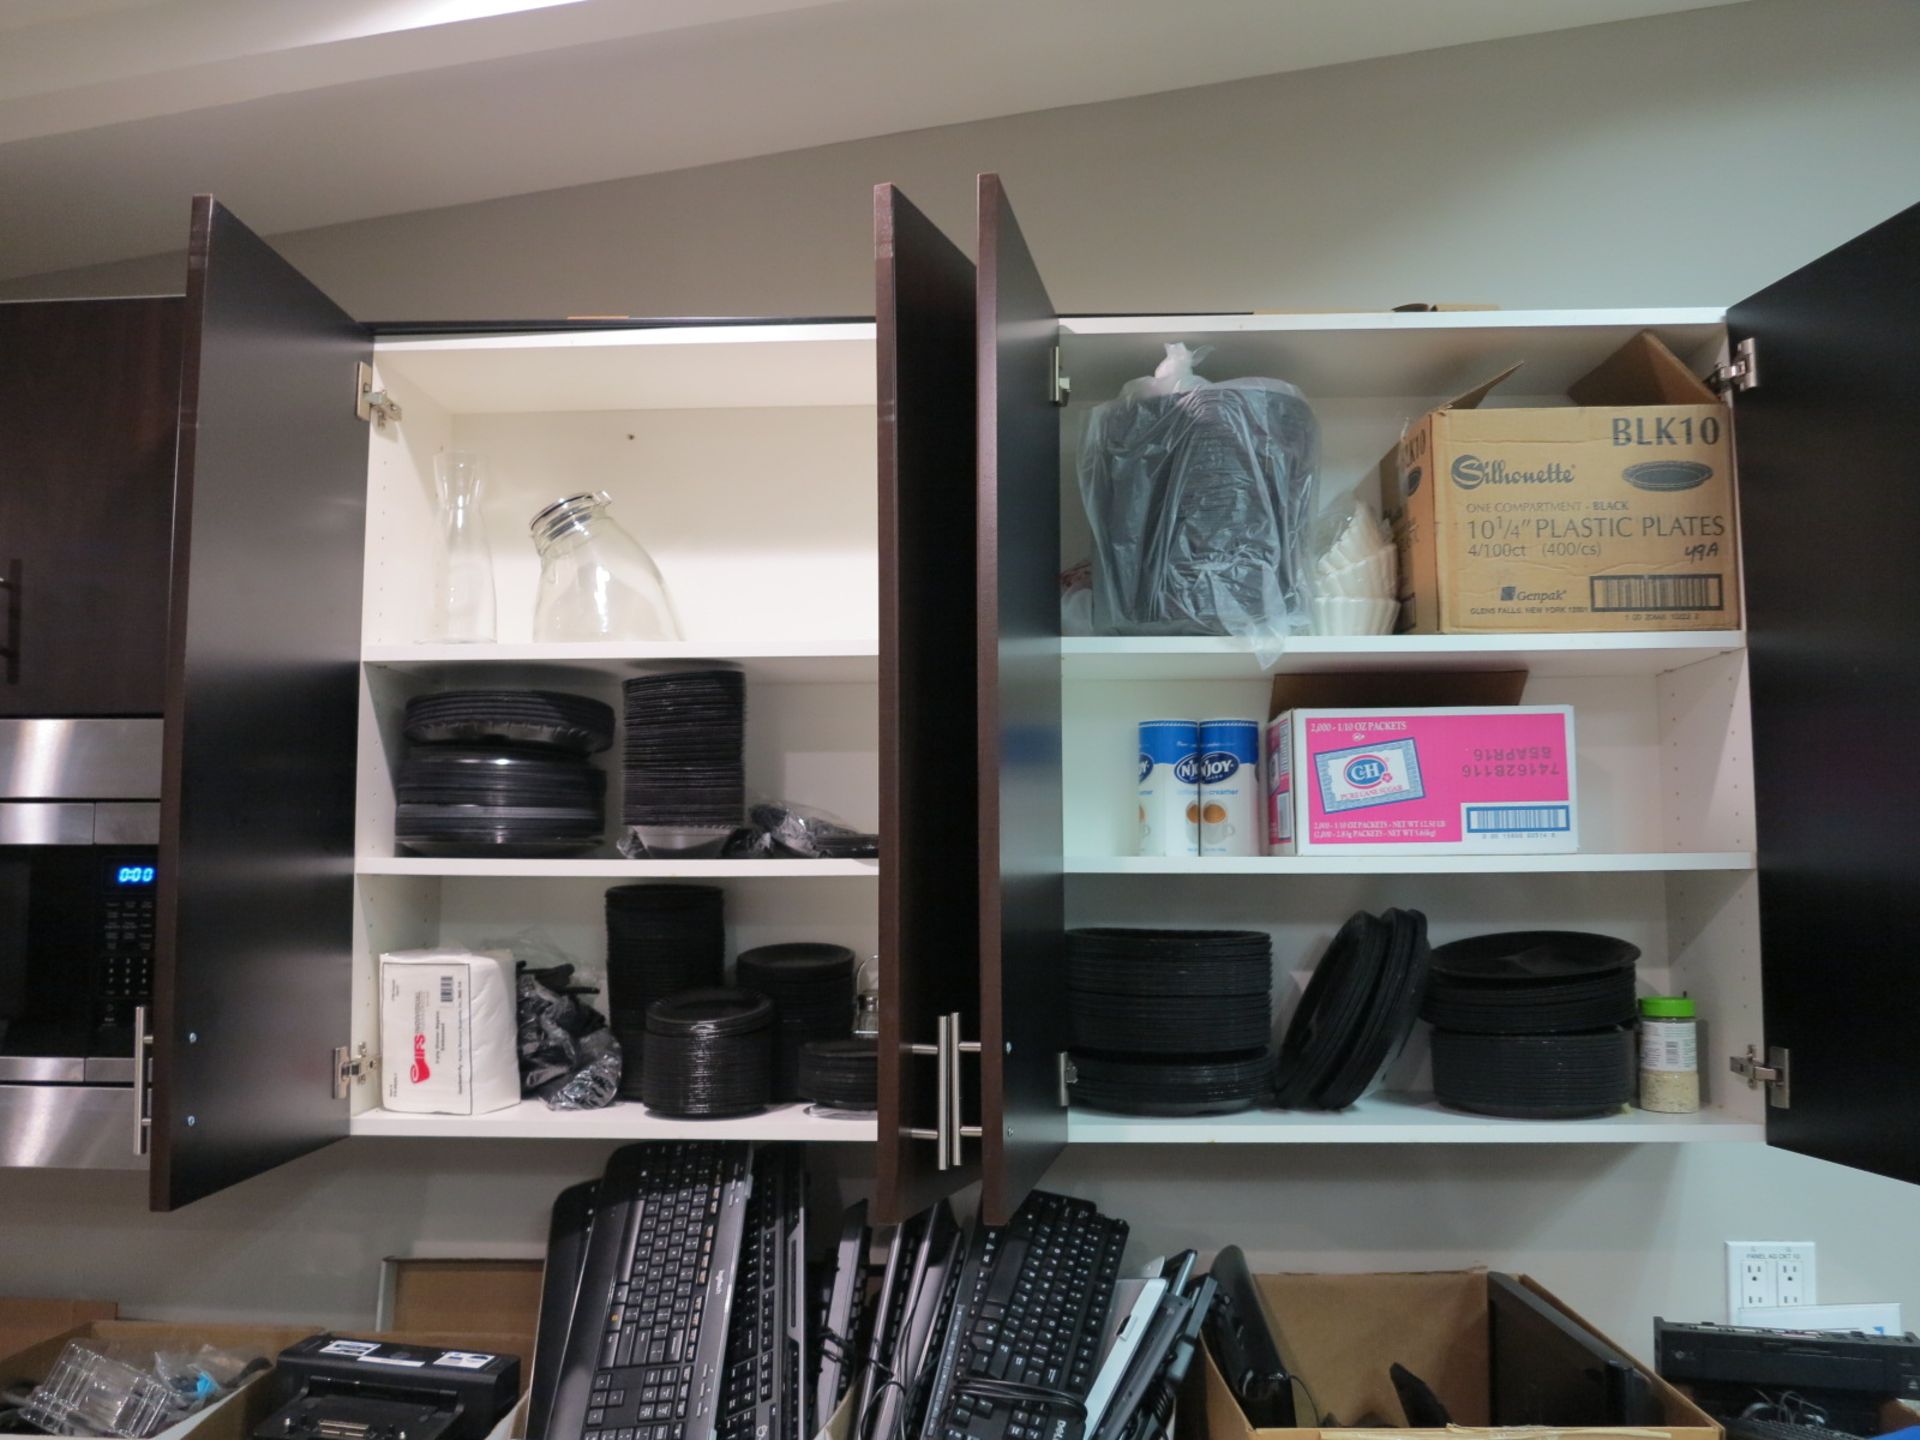 LOT - CONTENTS OF CABINETS AND DRAWERS (BREAK ROOM SUPPLIES) - Image 4 of 6